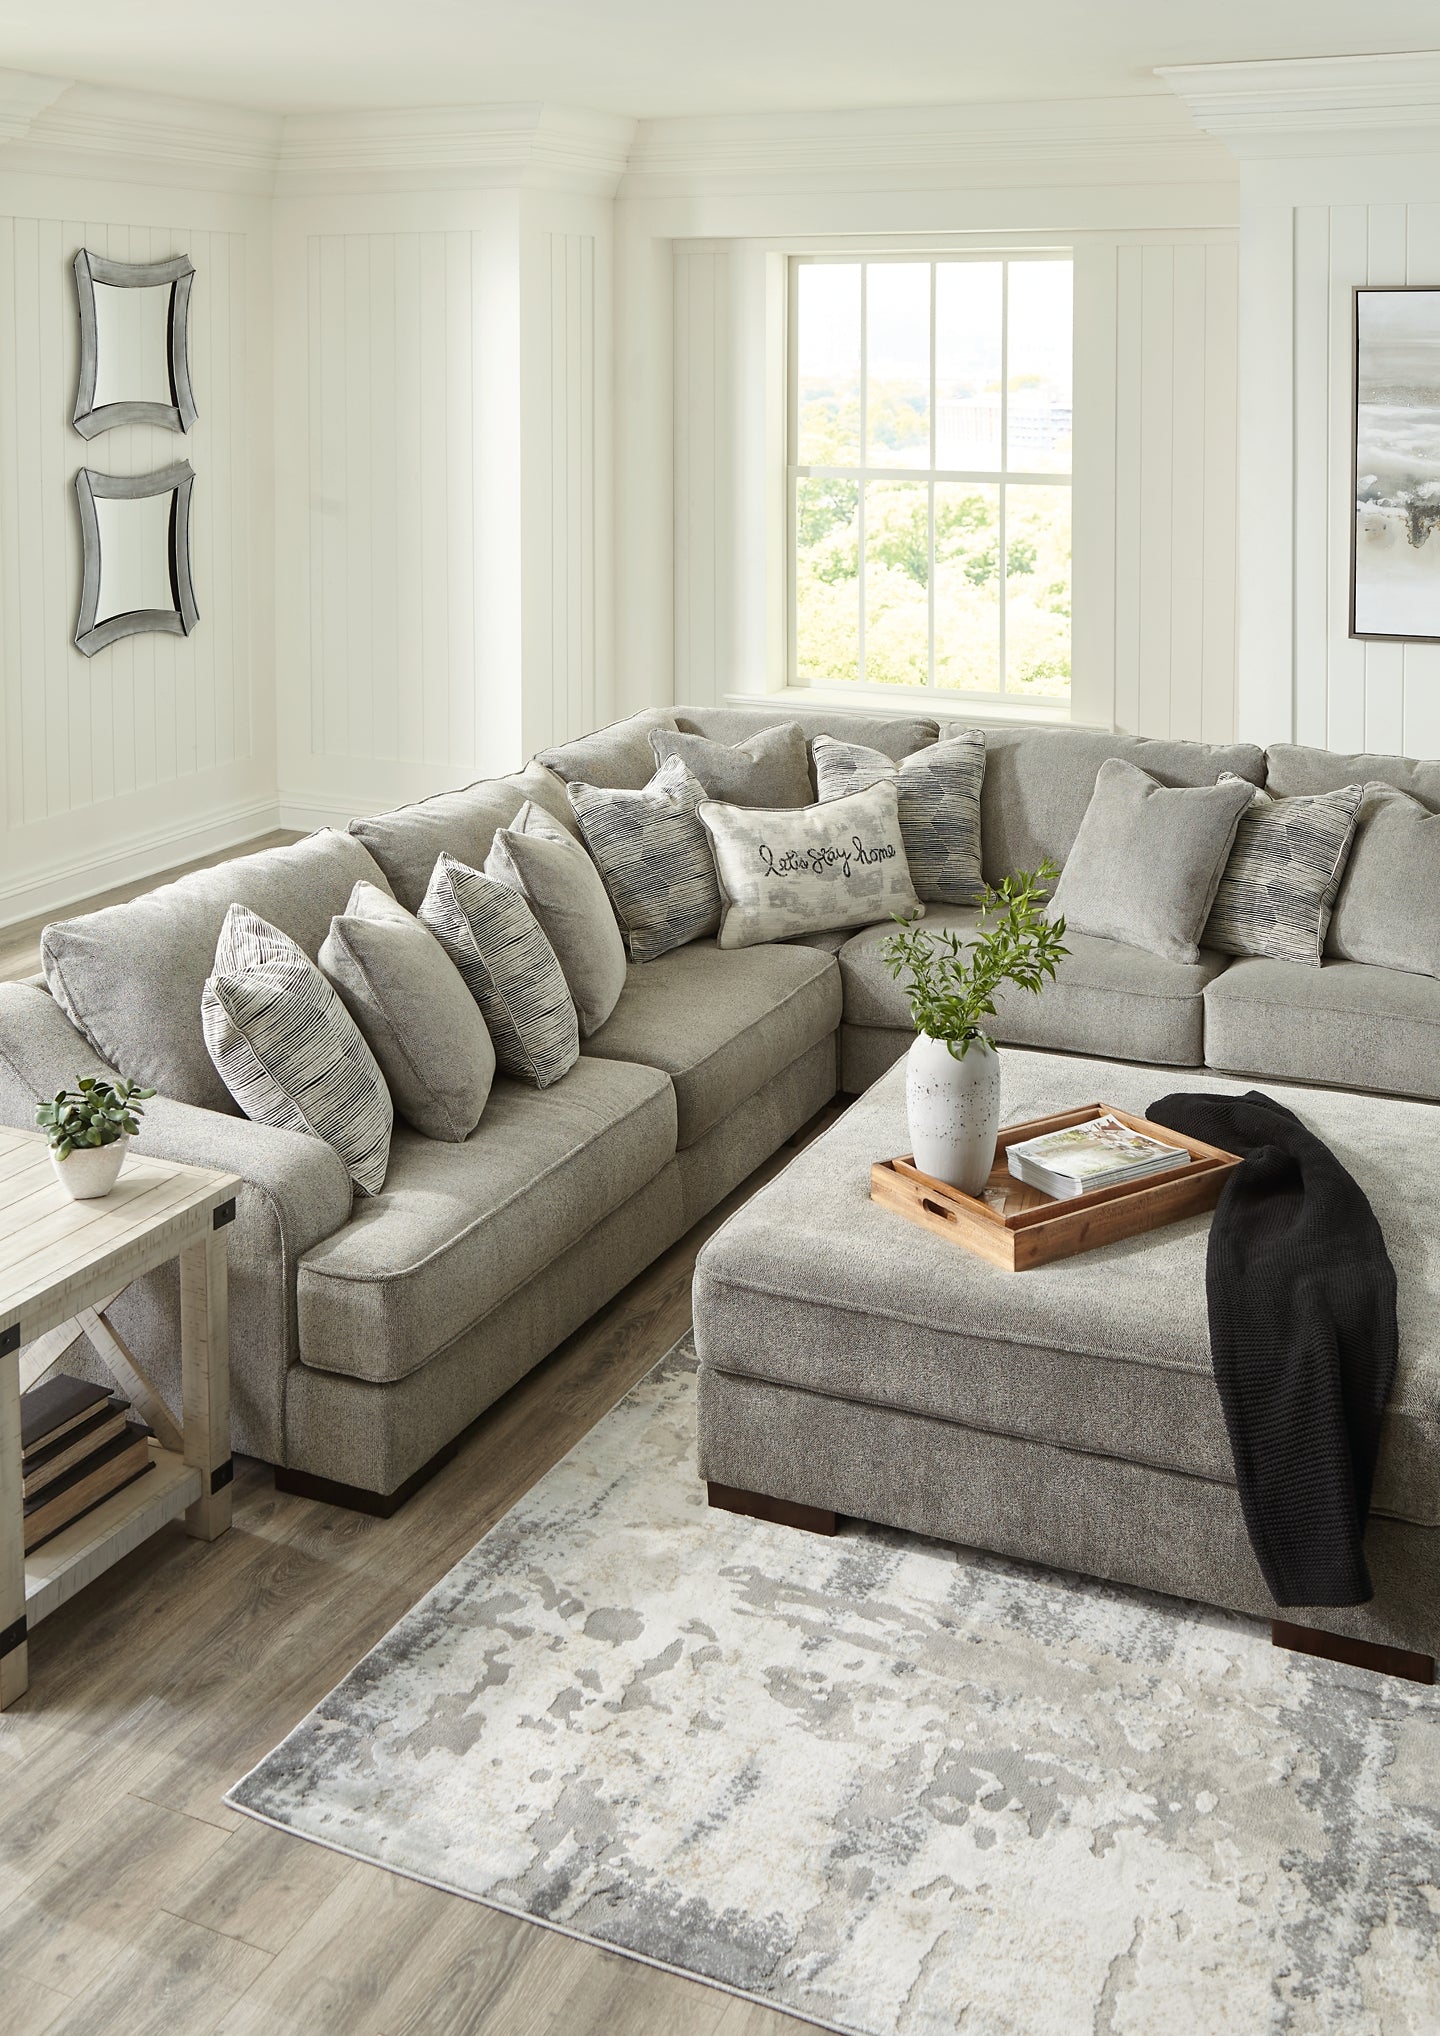 Bayless 3-Piece Sectional with Ottoman at Walker Mattress and Furniture